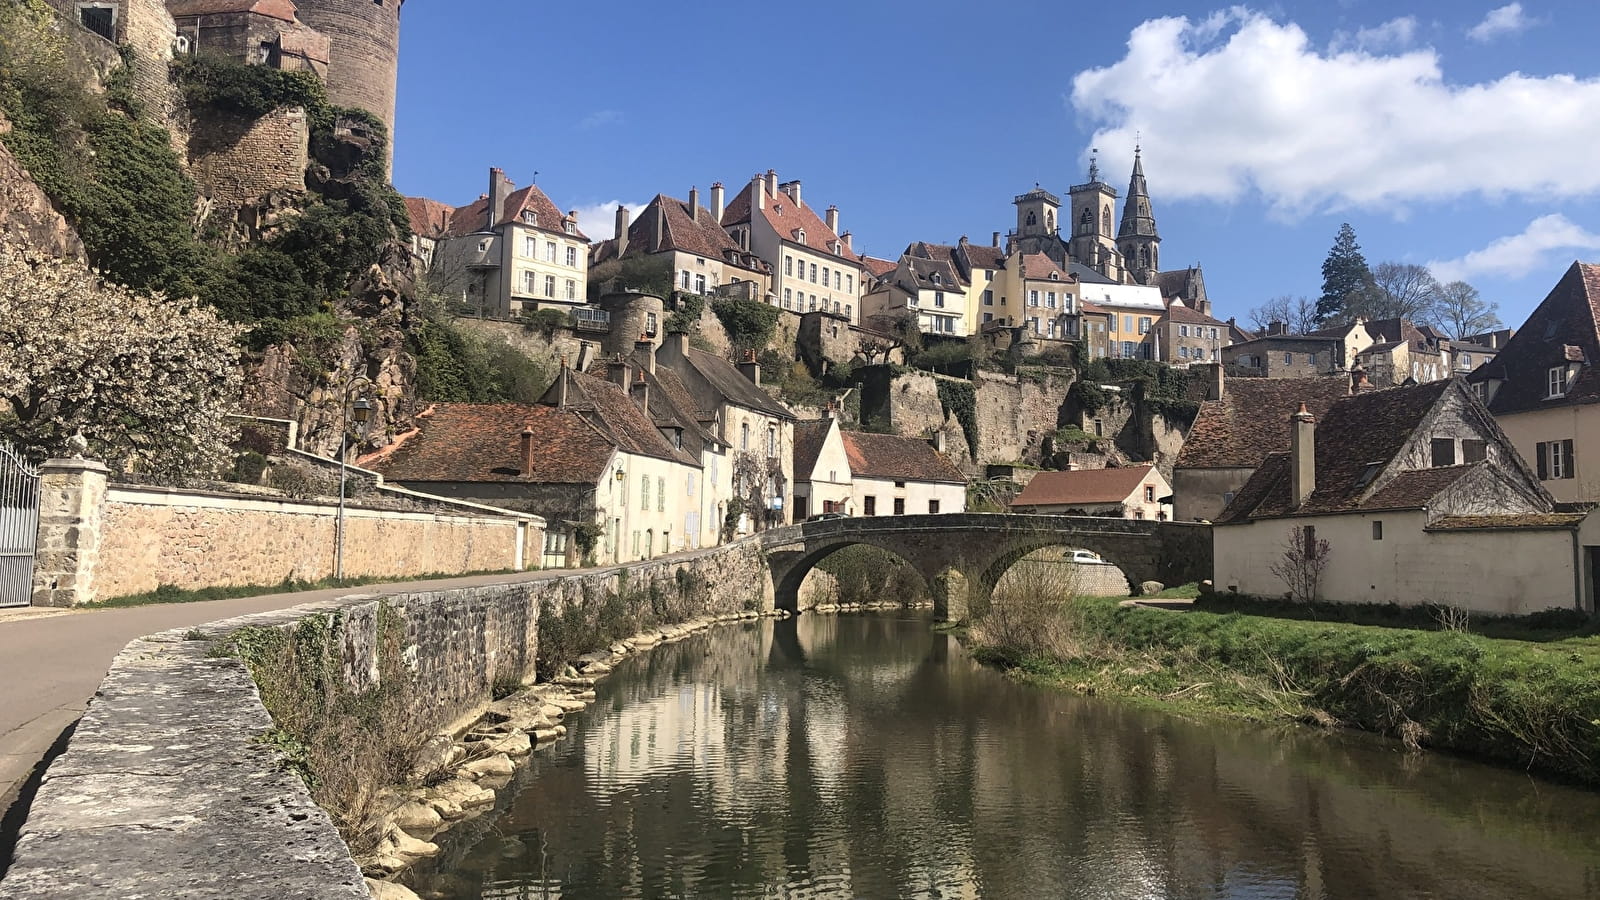 Guided tour of Semur-en-Auxois from top to bottom!